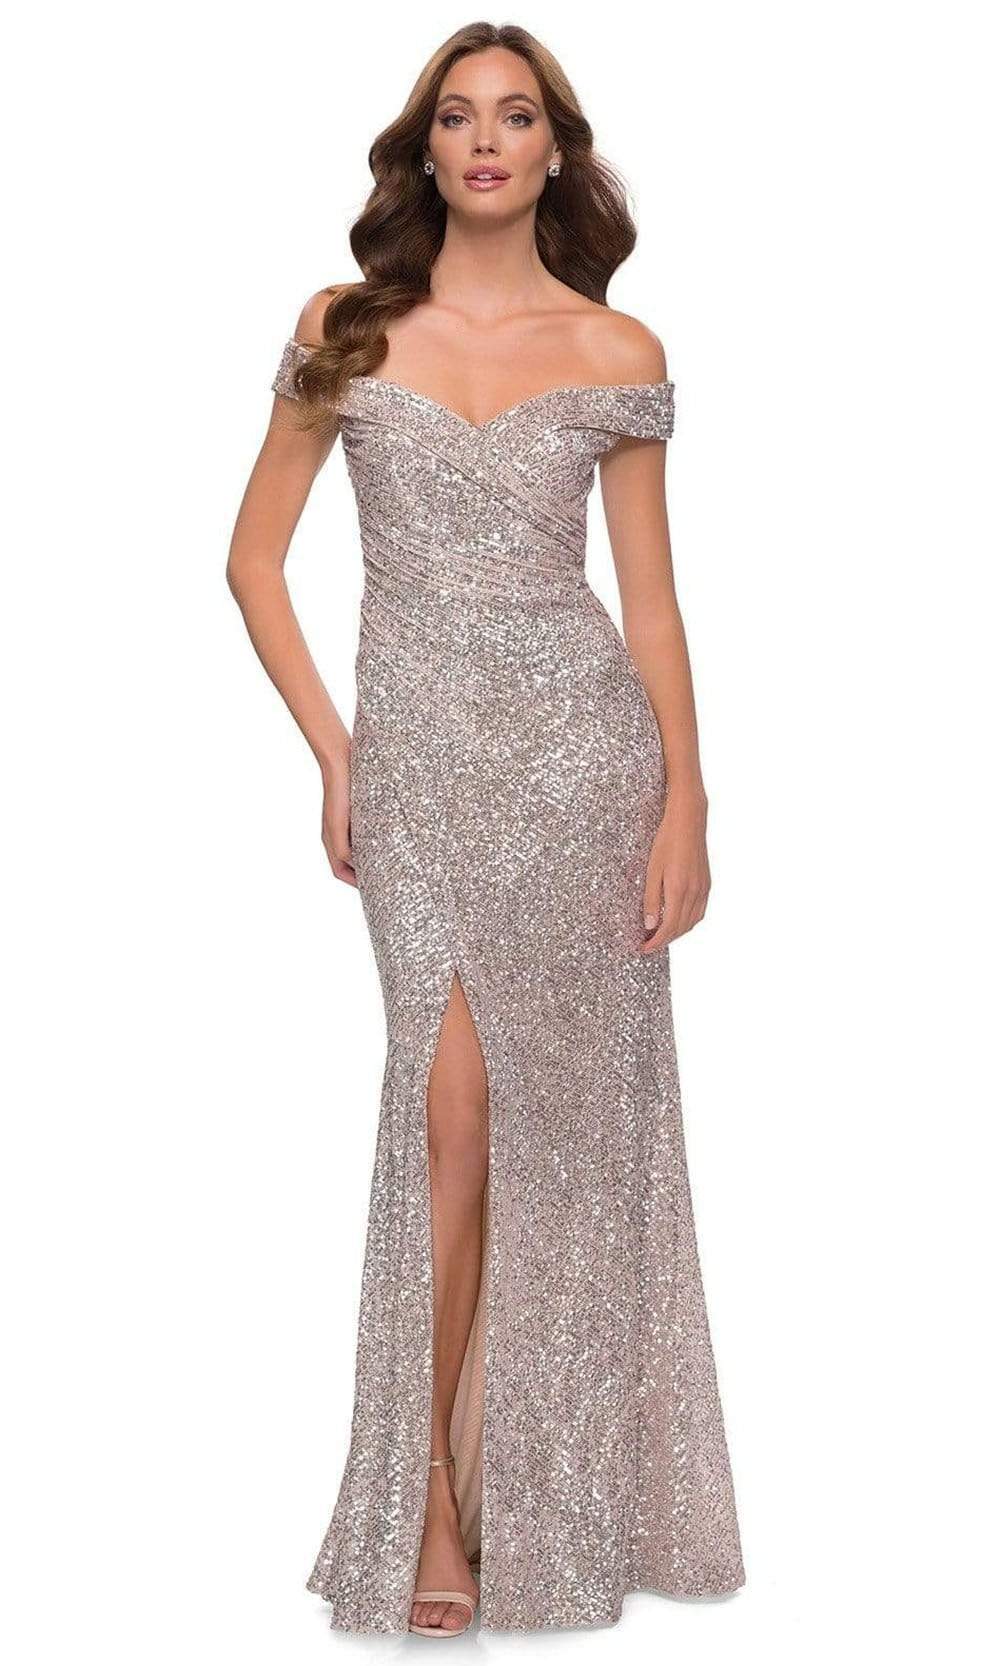 La Femme - Off Shoulder Sequined High Slit Dress 29831SC - 1 pc Silver In Size 10 Available CCSALE 10 / Silver